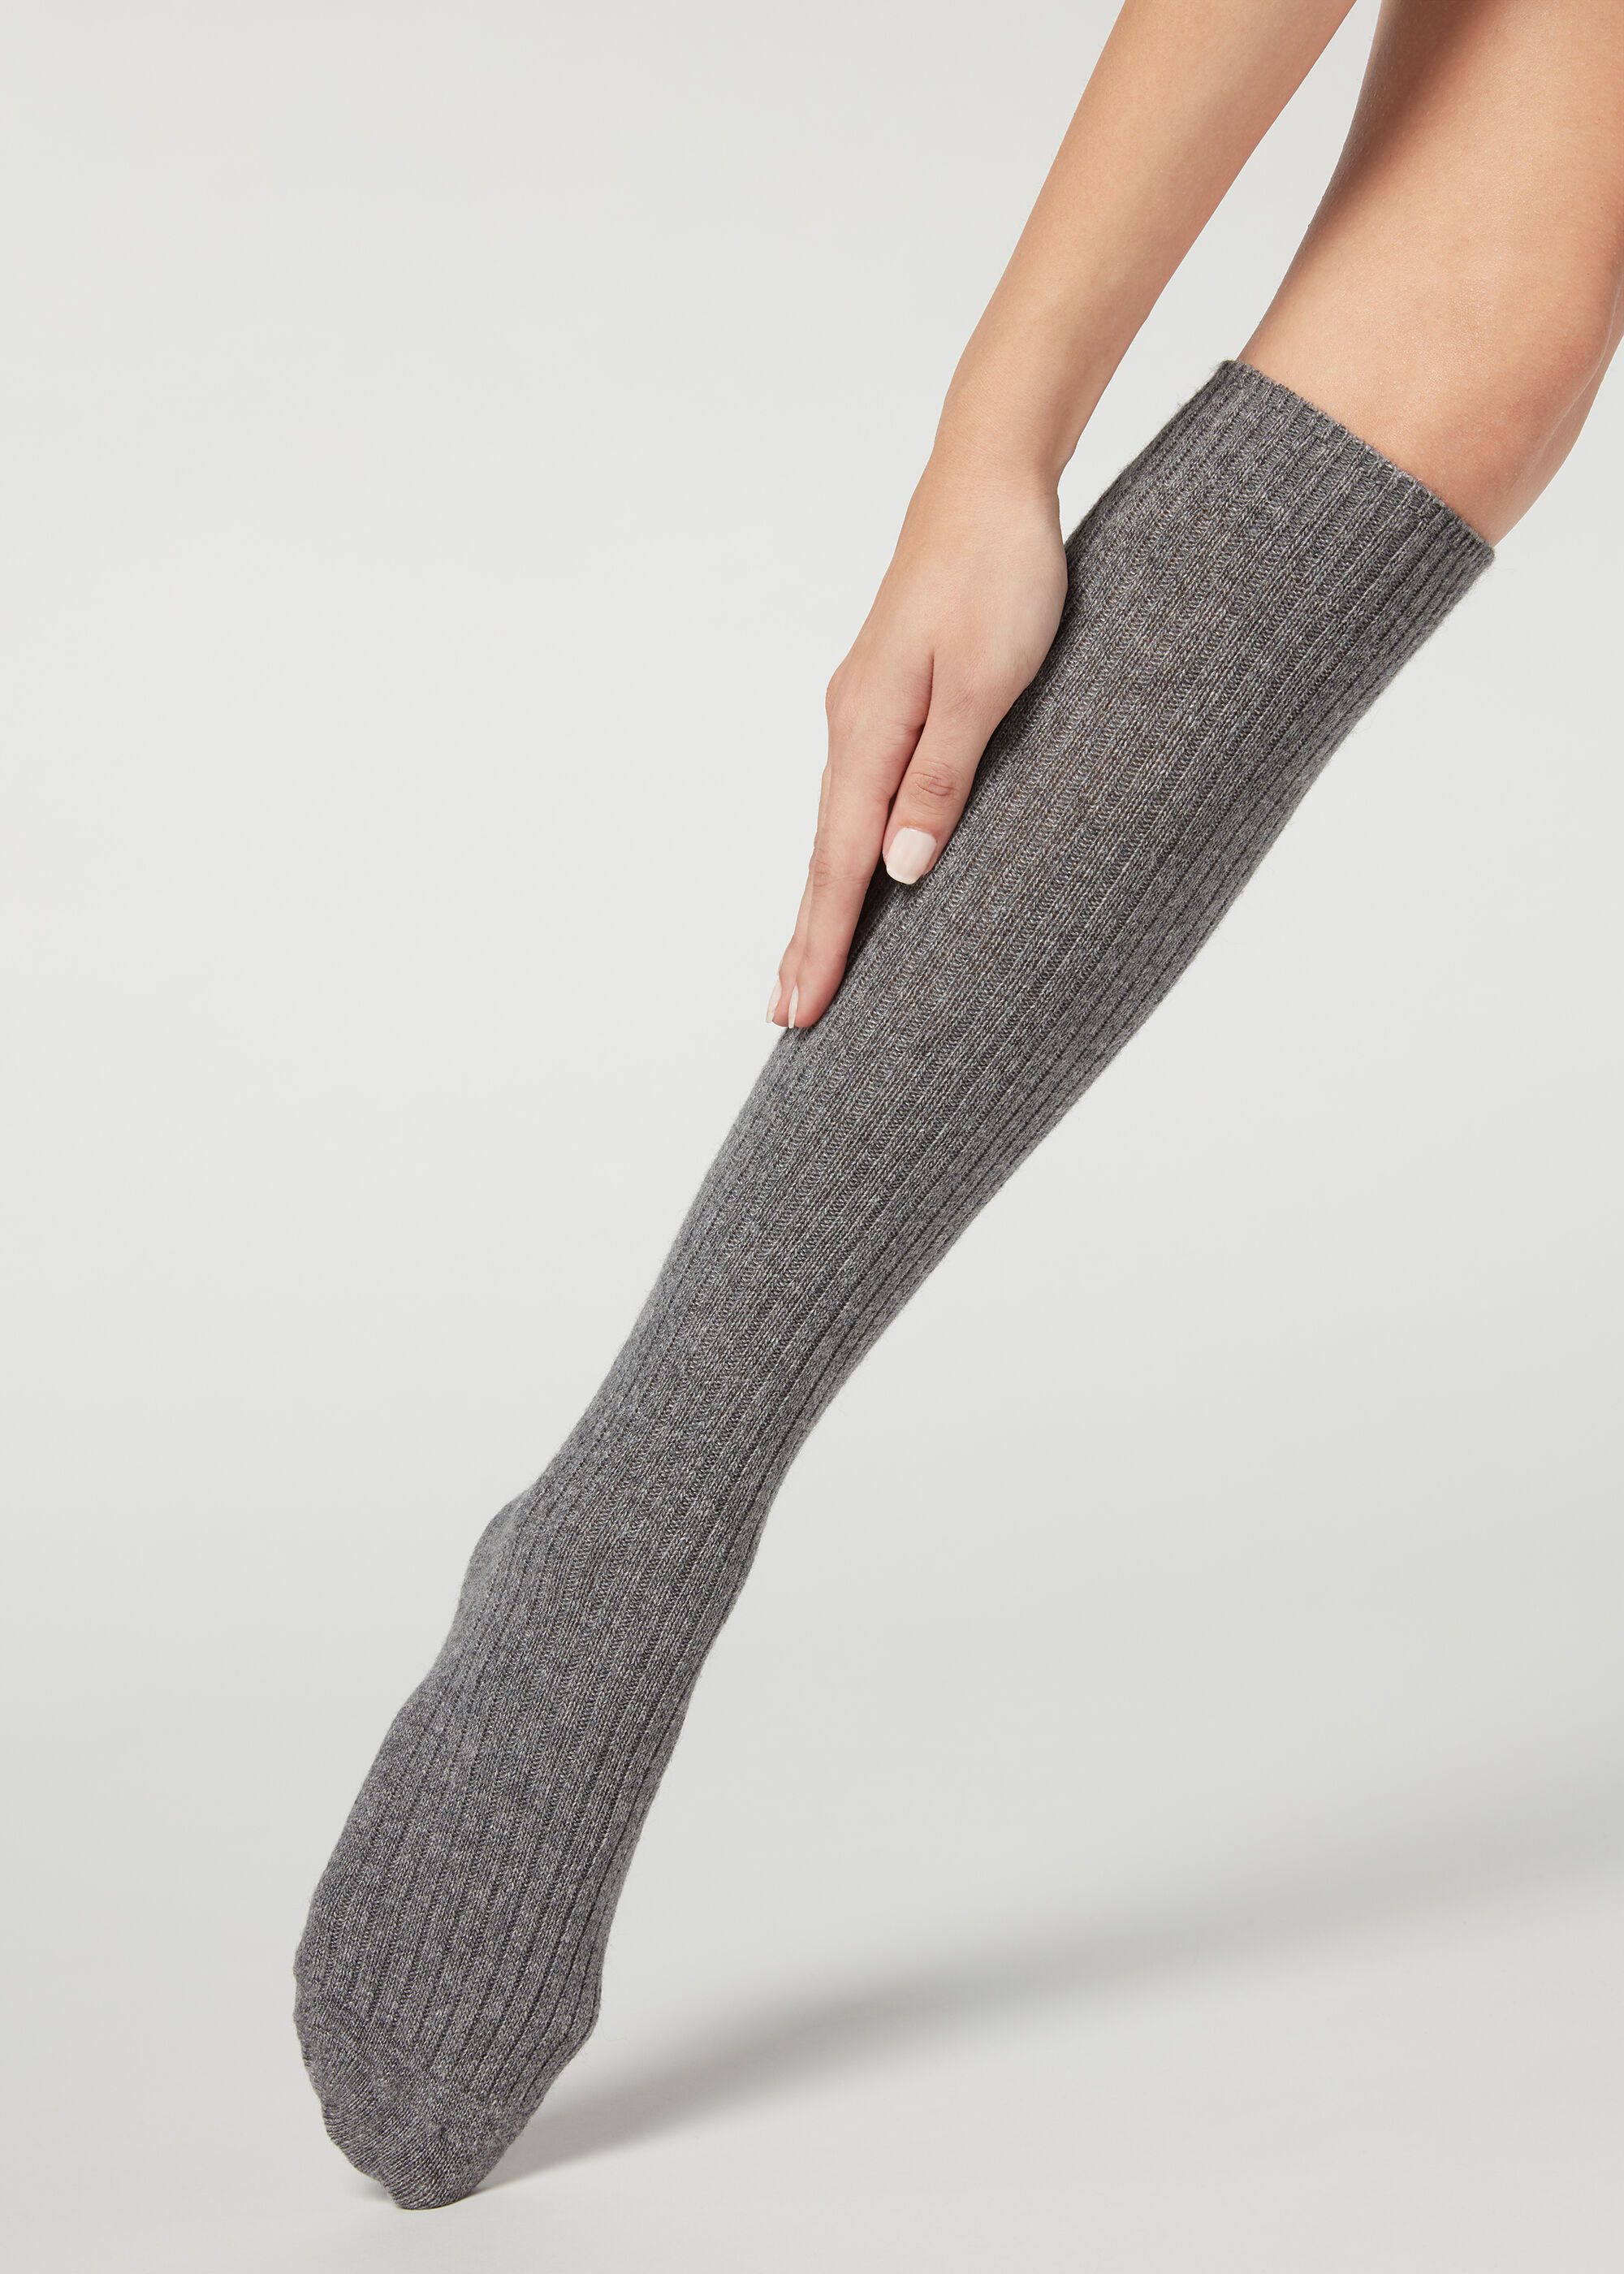 Women’s Ribbed Long Socks with Wool and Cashmere | Calzedonia US